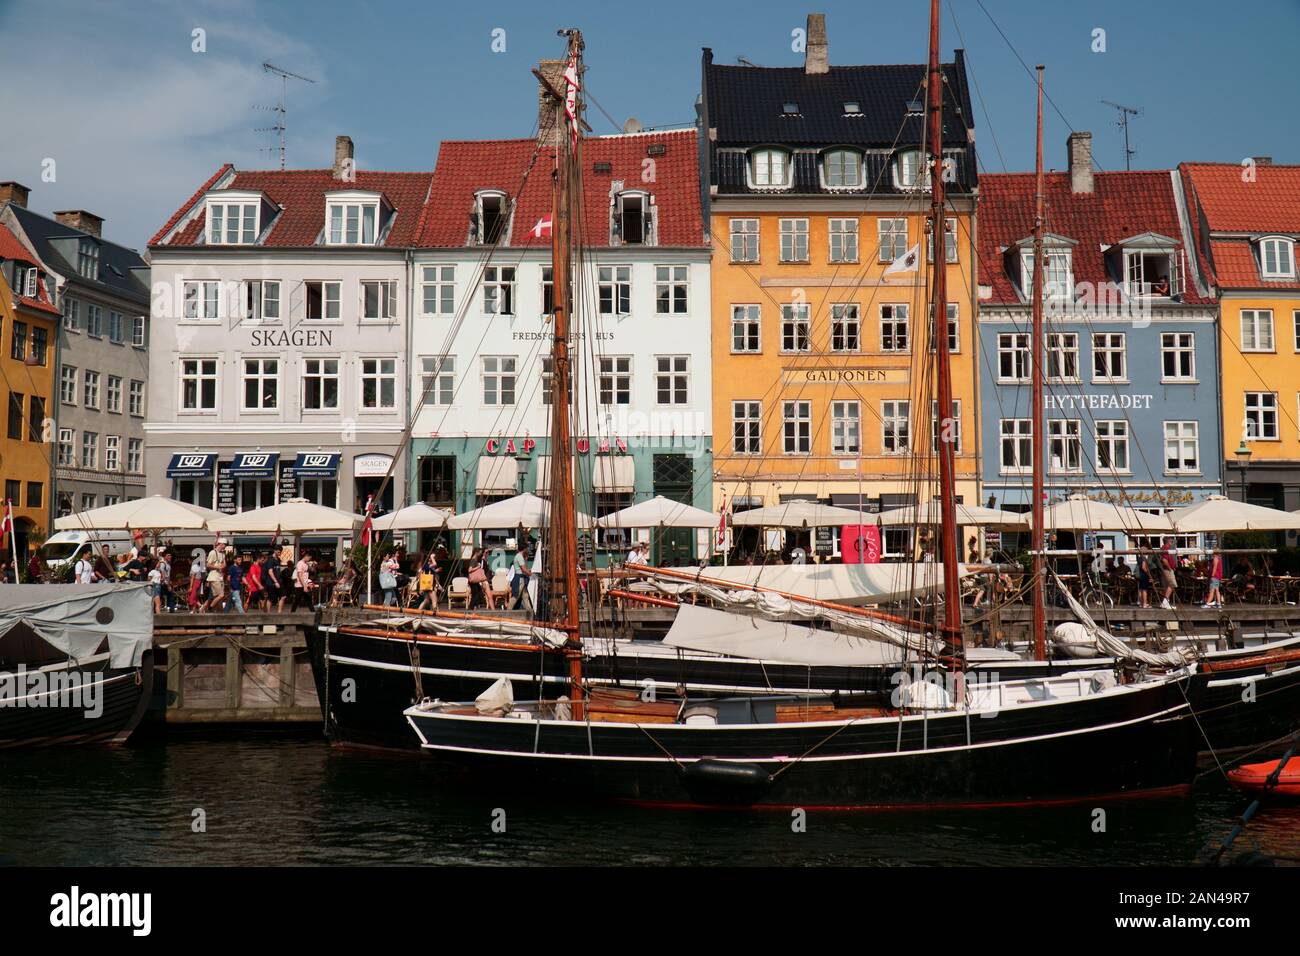 Boats docked in front of an array of colourful buildings in Nyhavn, Copenhagen Stock Photo